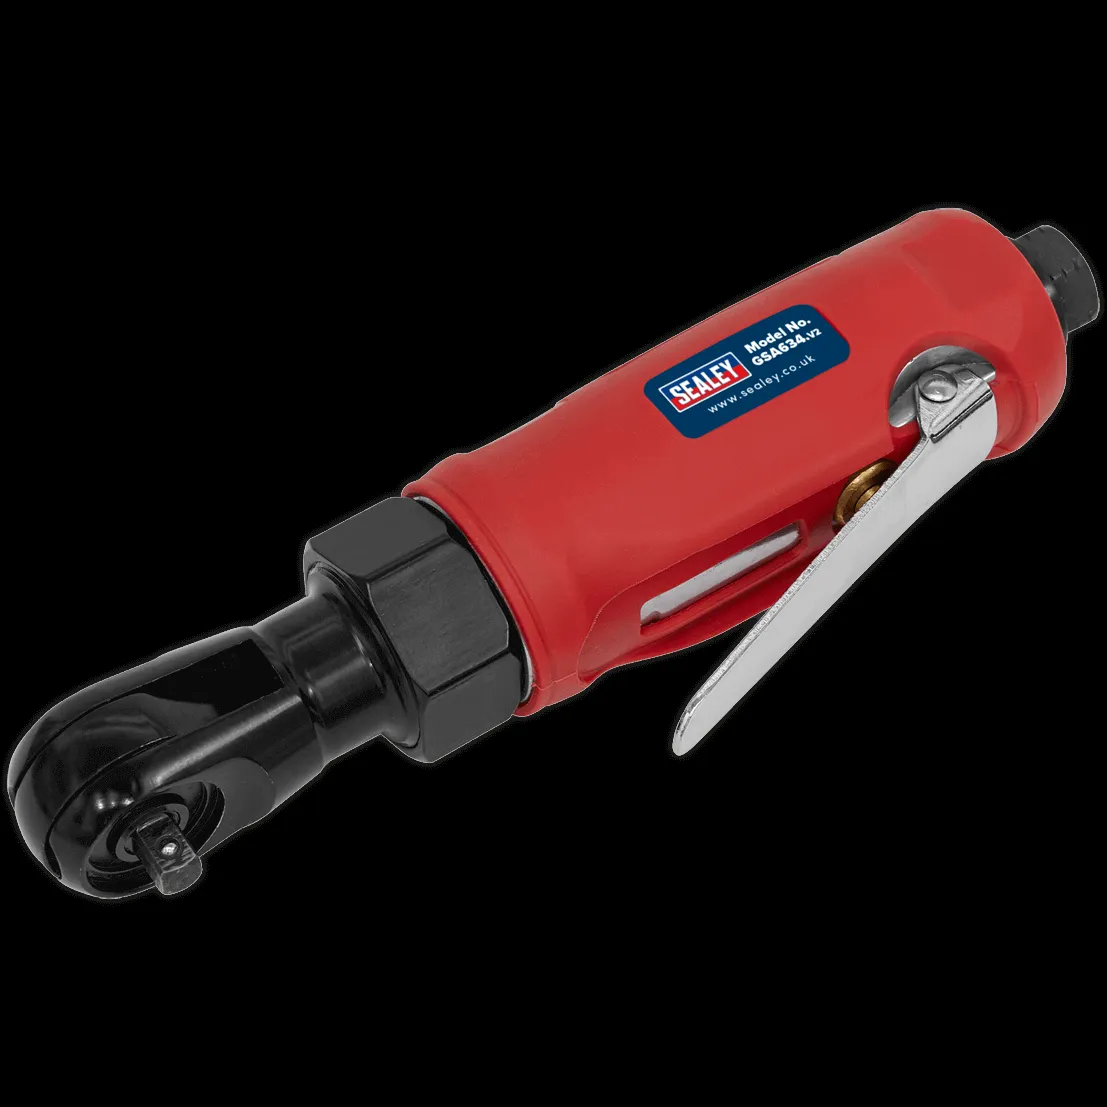 Sealey GSA634 Compact Air Ratchet Wrench 1/4" Drive